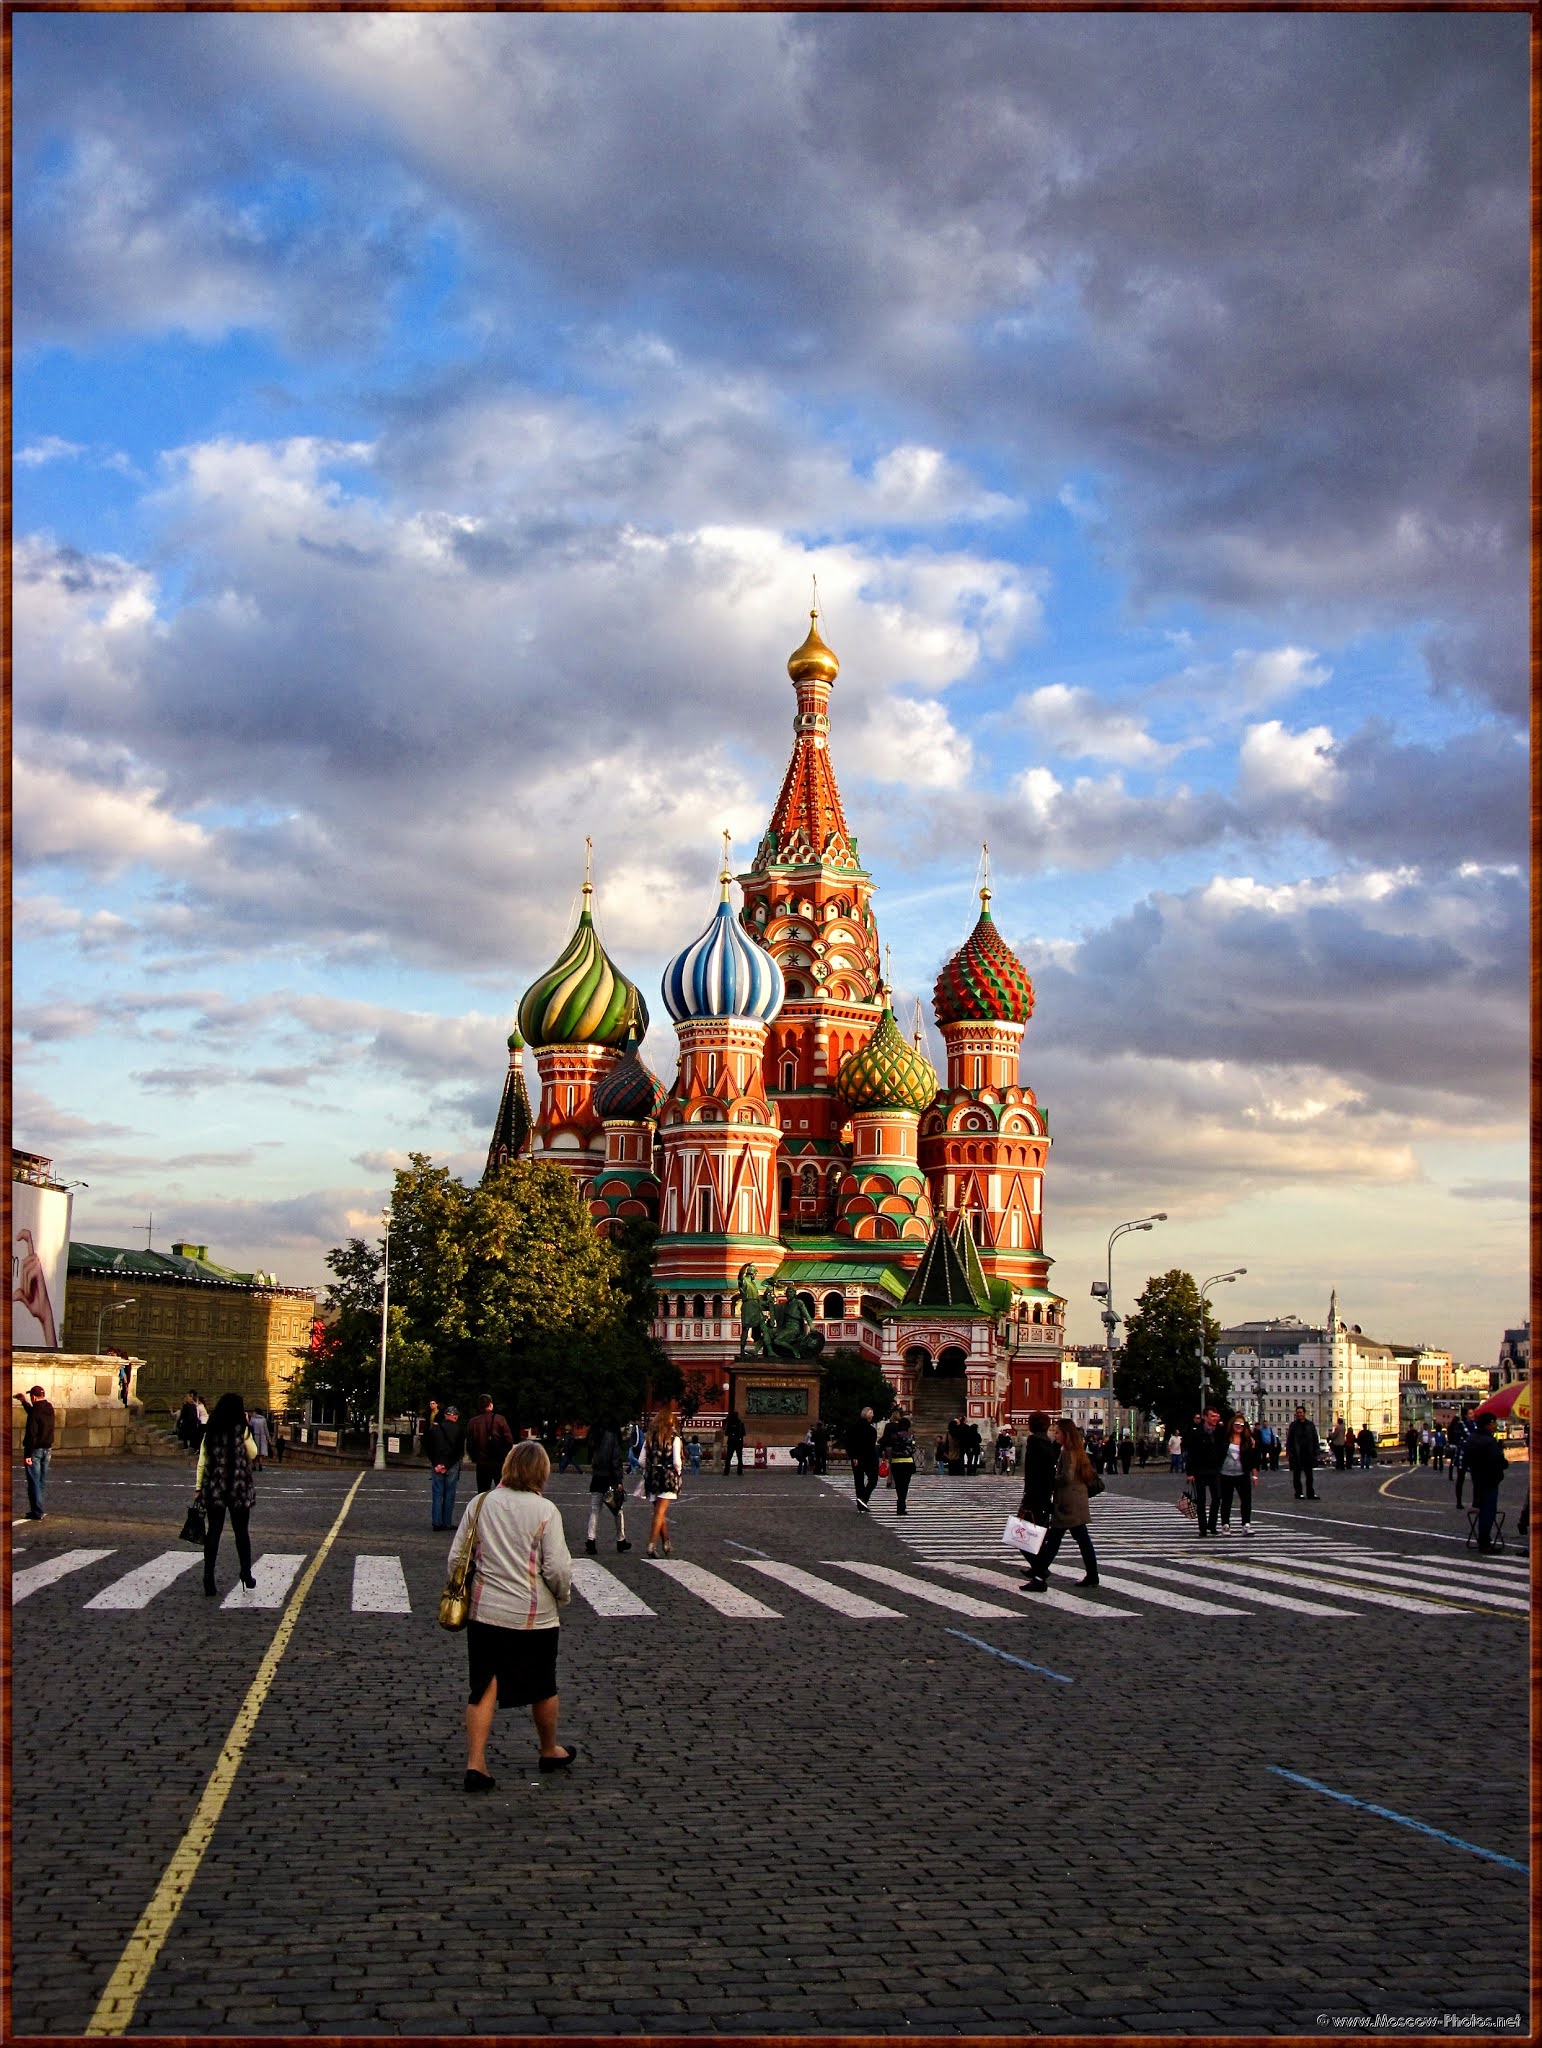 St. Basil's Cathedral at sunset